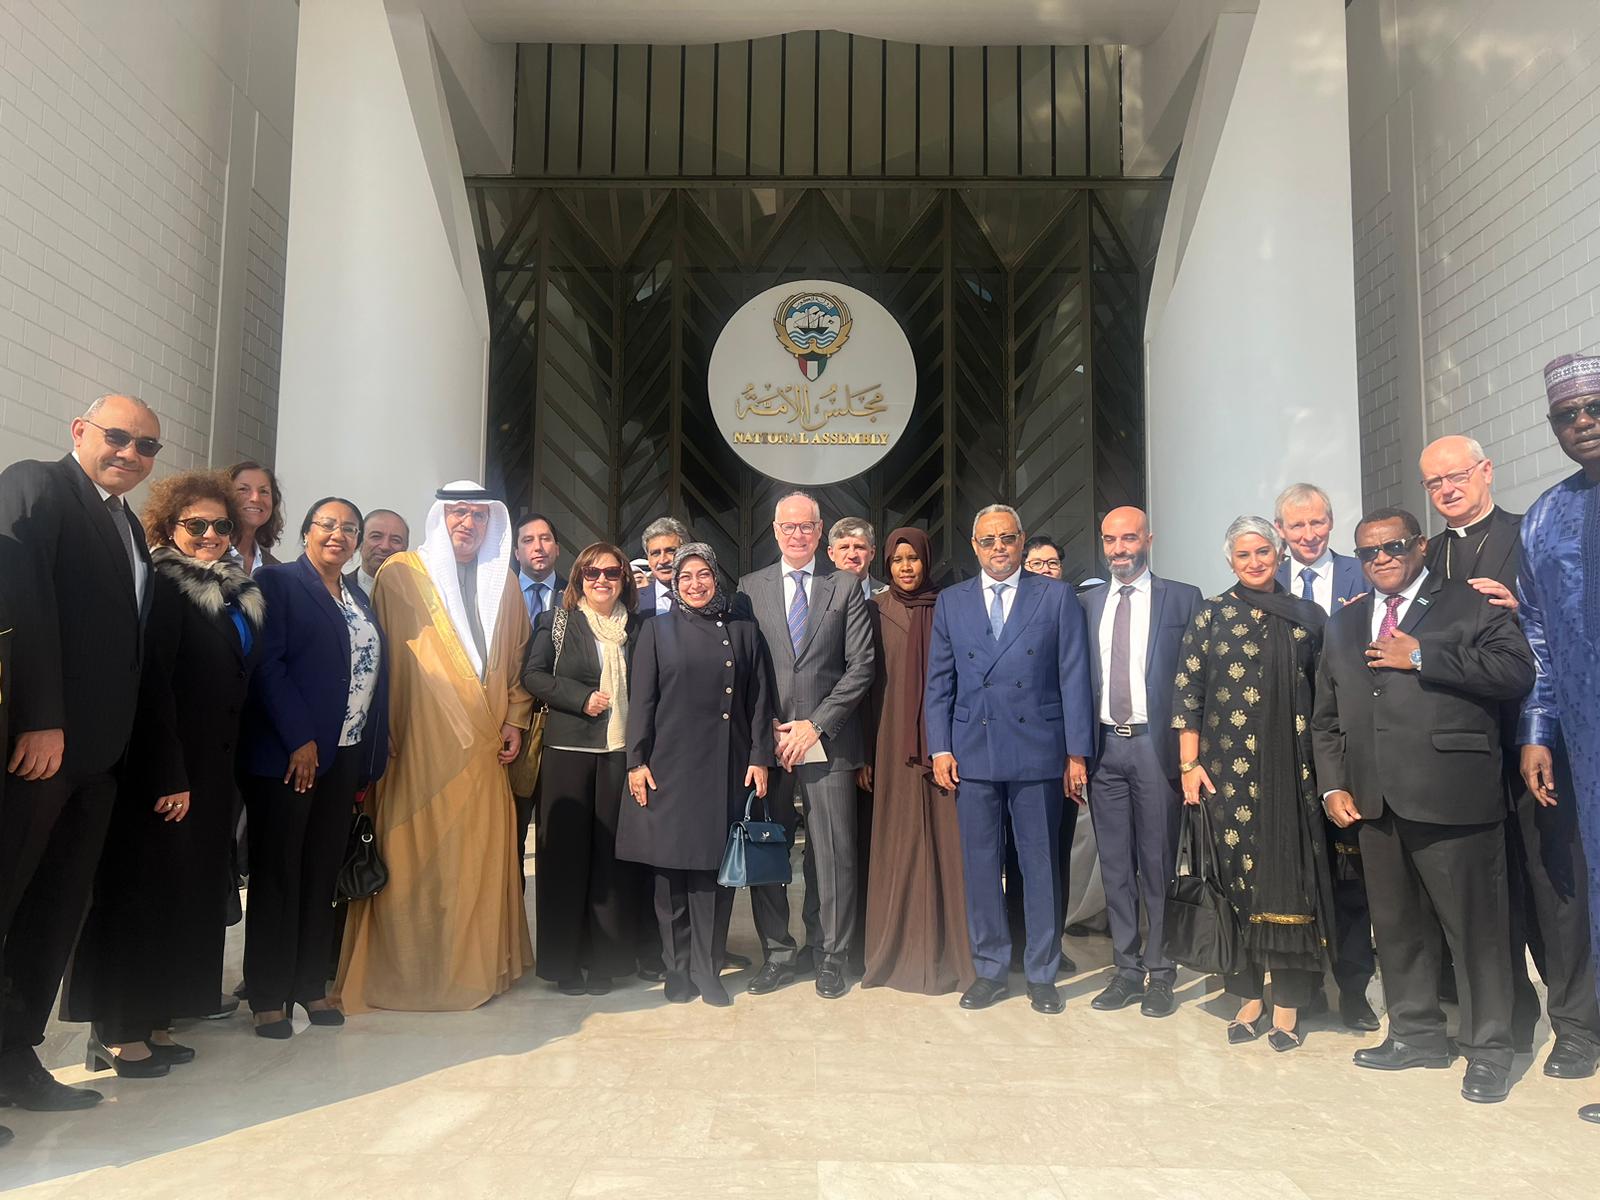 Participation of the Ambassador in the Special National Session for the performance of his Highness Sheikh Meshaal as Amir of the State of the State of Kuwait.